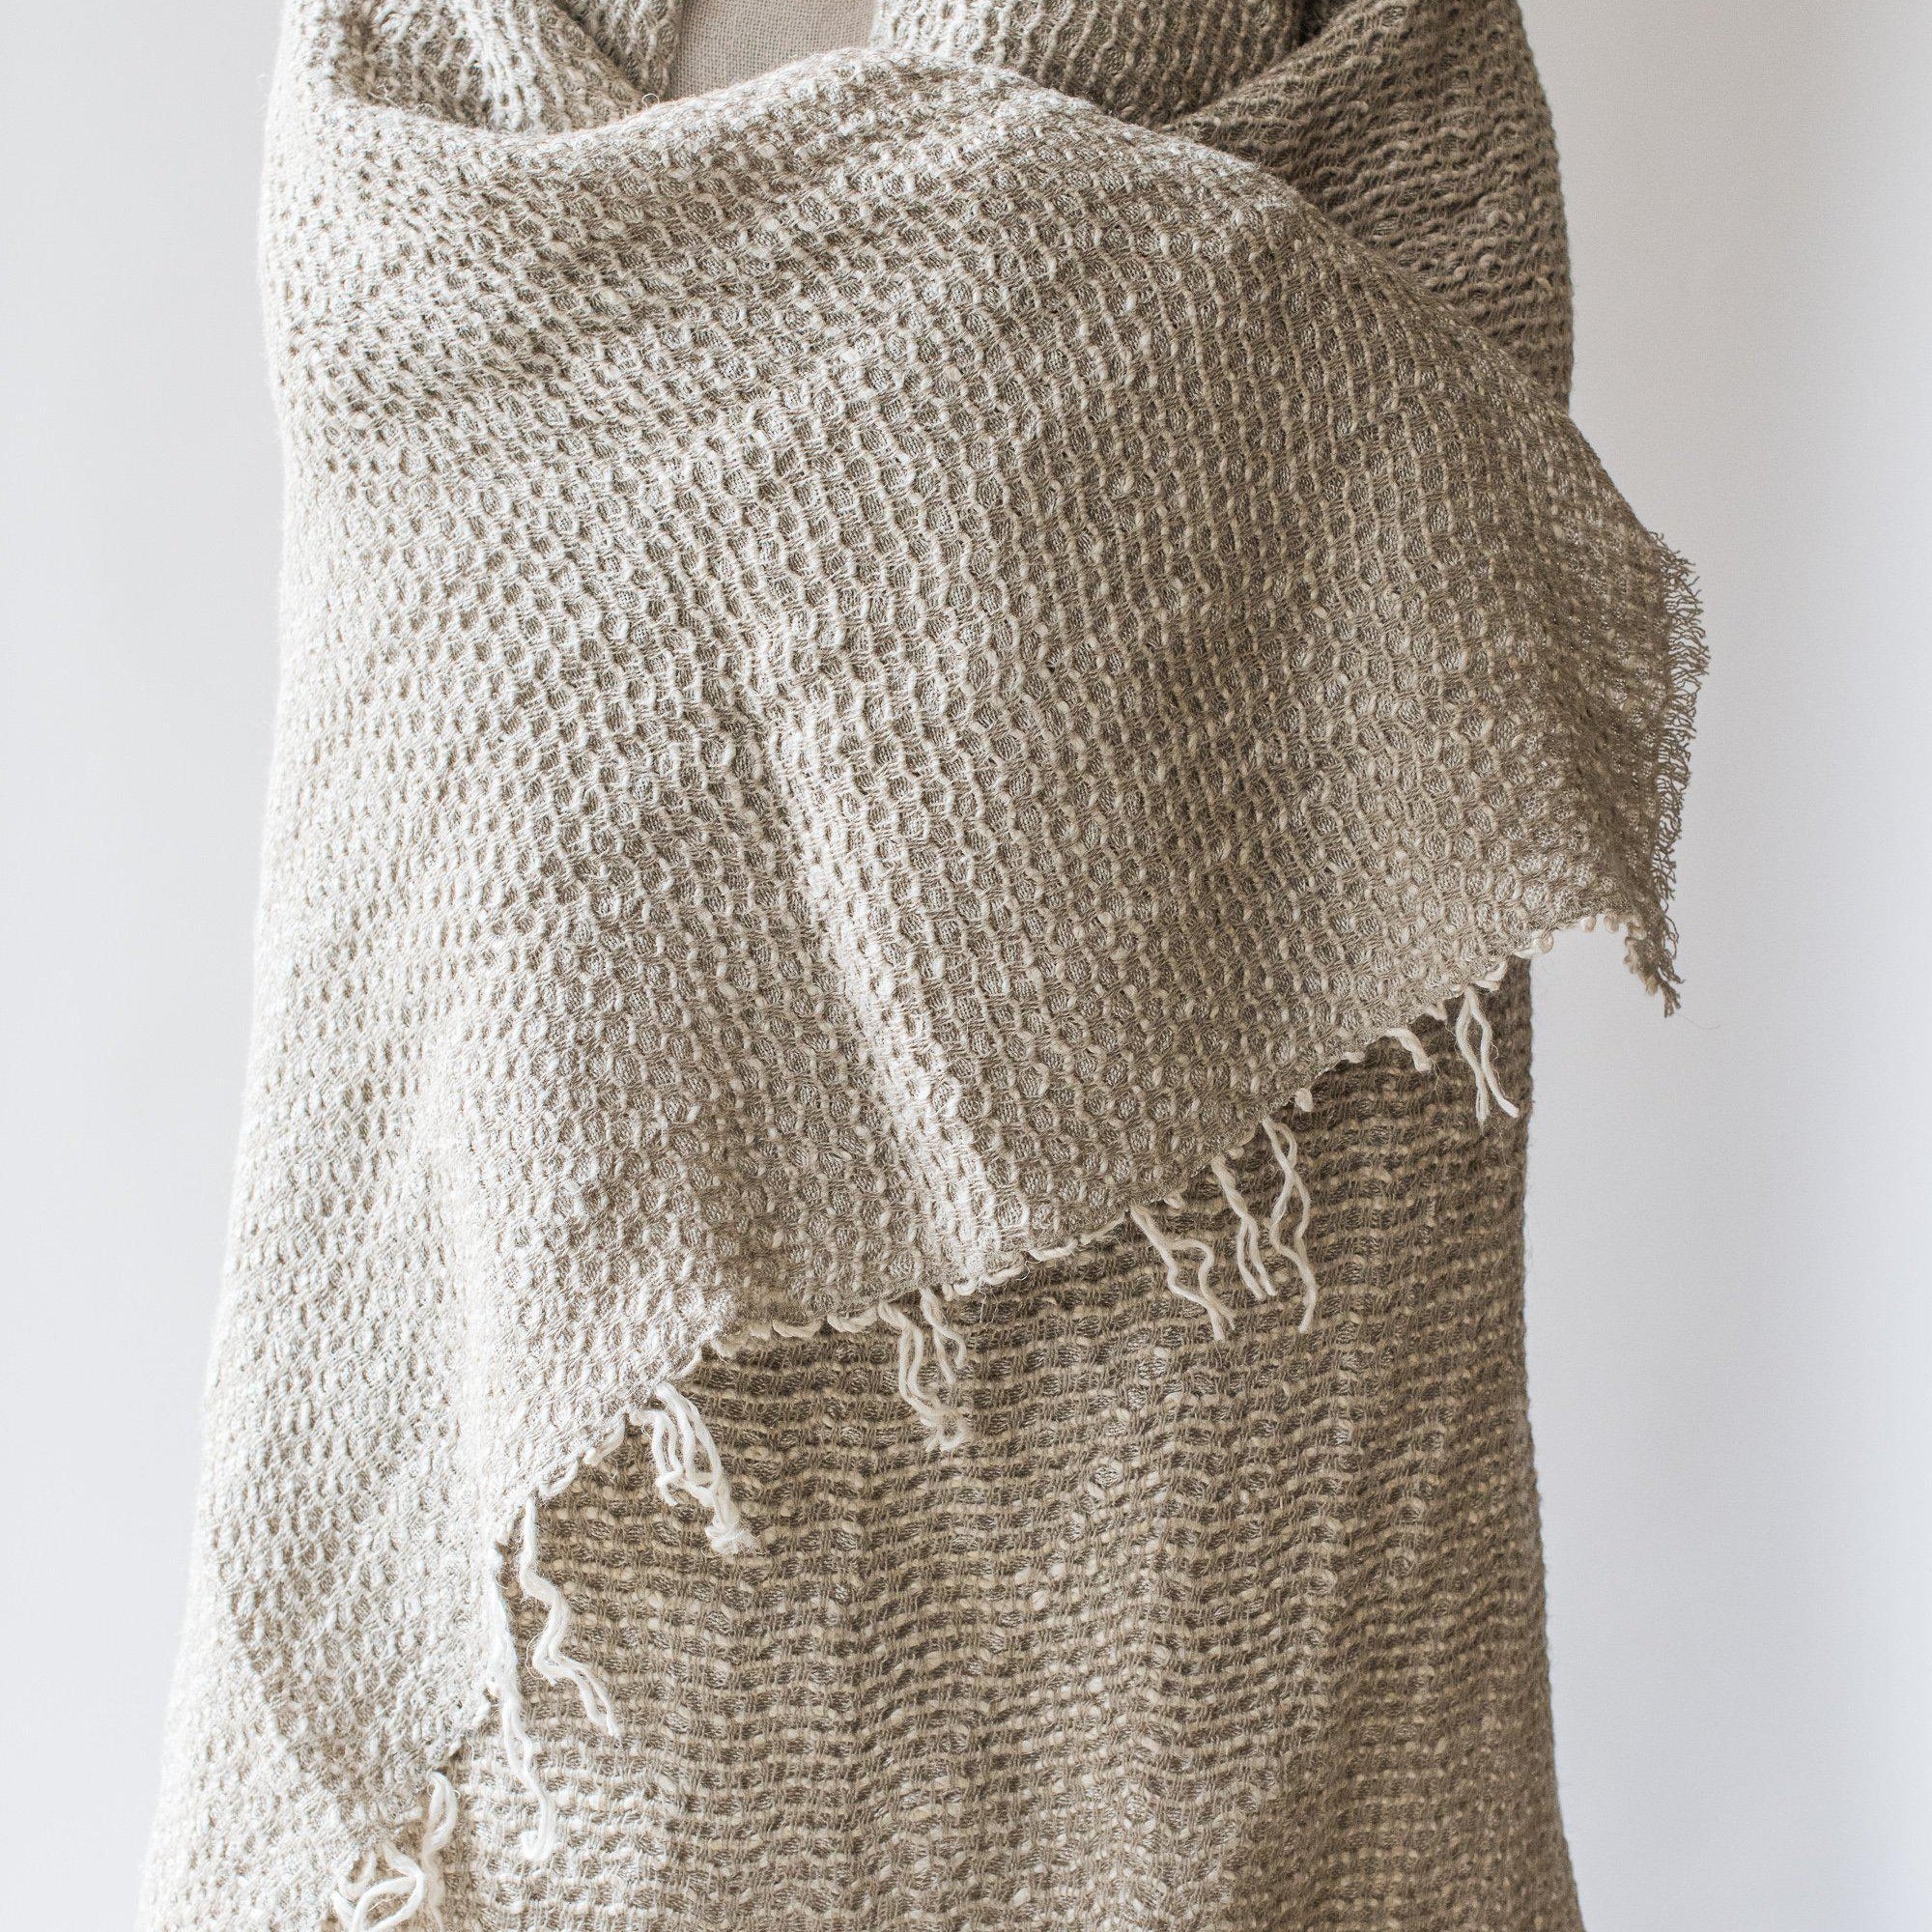 Linen throw Mezgine 155x140cm with fringes in natural